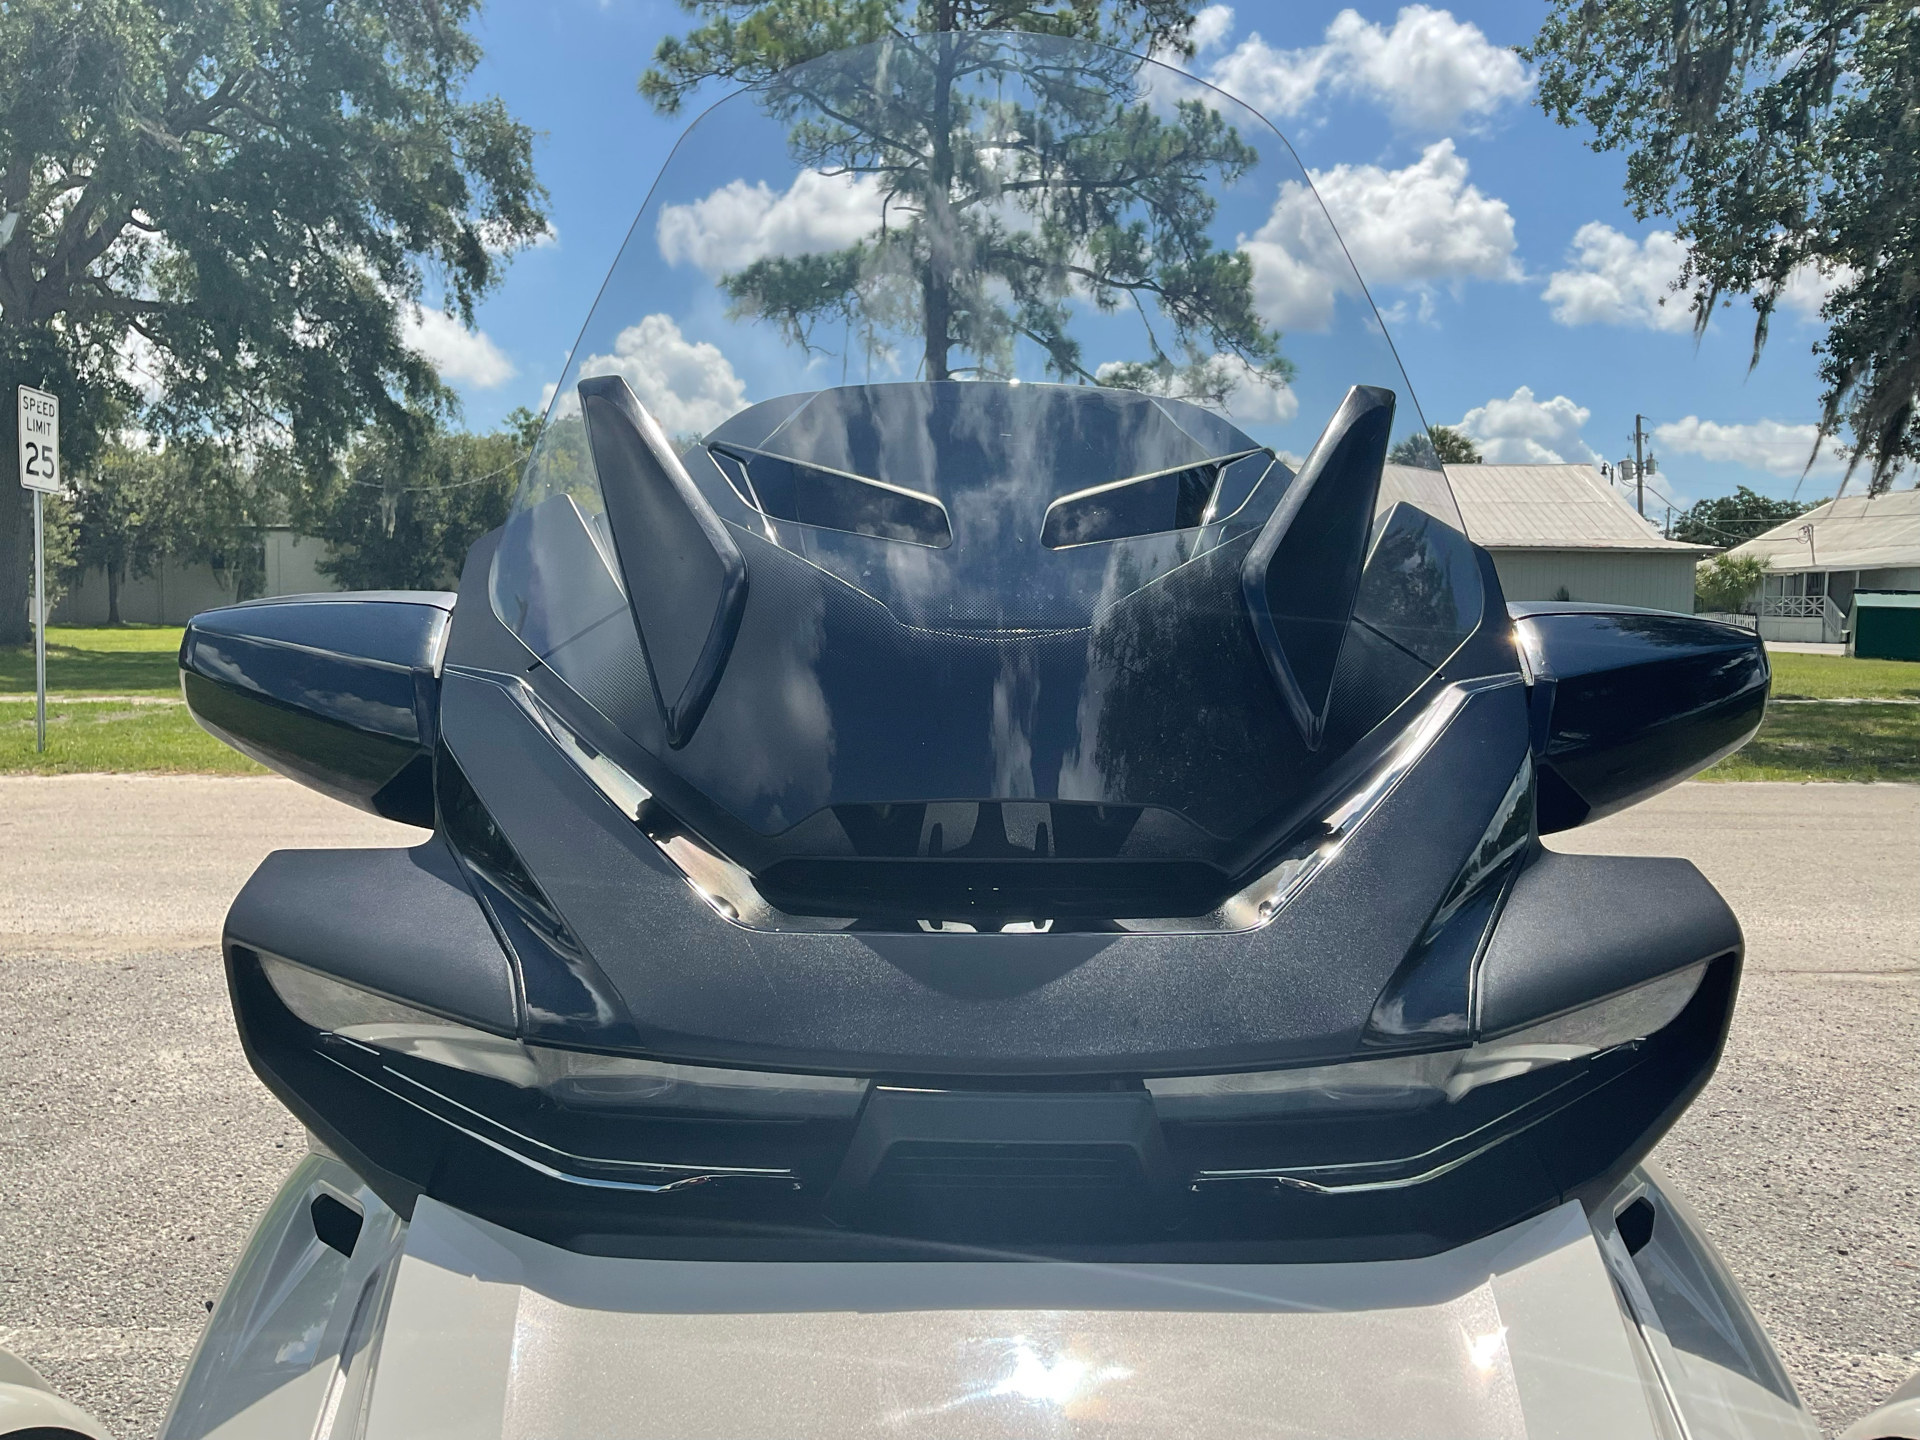 2020 Can-Am Spyder RT Limited in Sanford, Florida - Photo 17